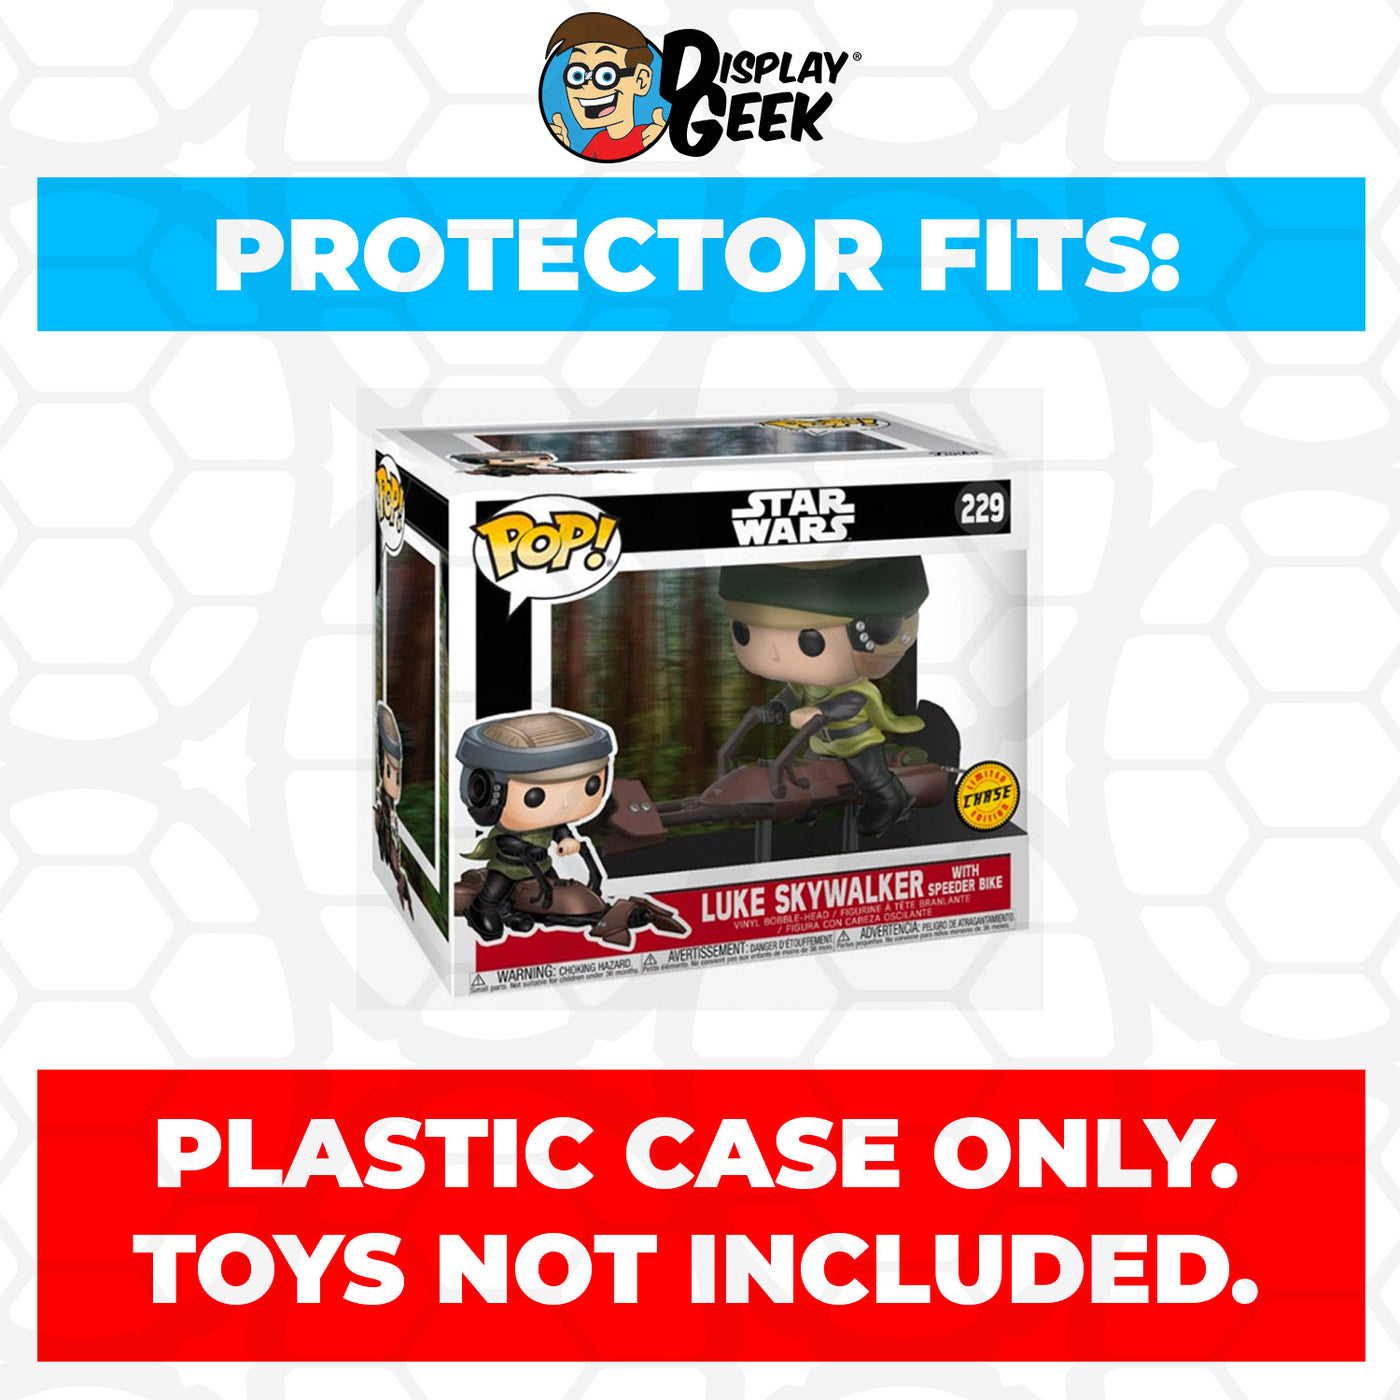 Pop Protector for Luke Skywalker with Speeder Bike Chase #229 Funko Pop Rides on The Protector Guide App by Display Geek